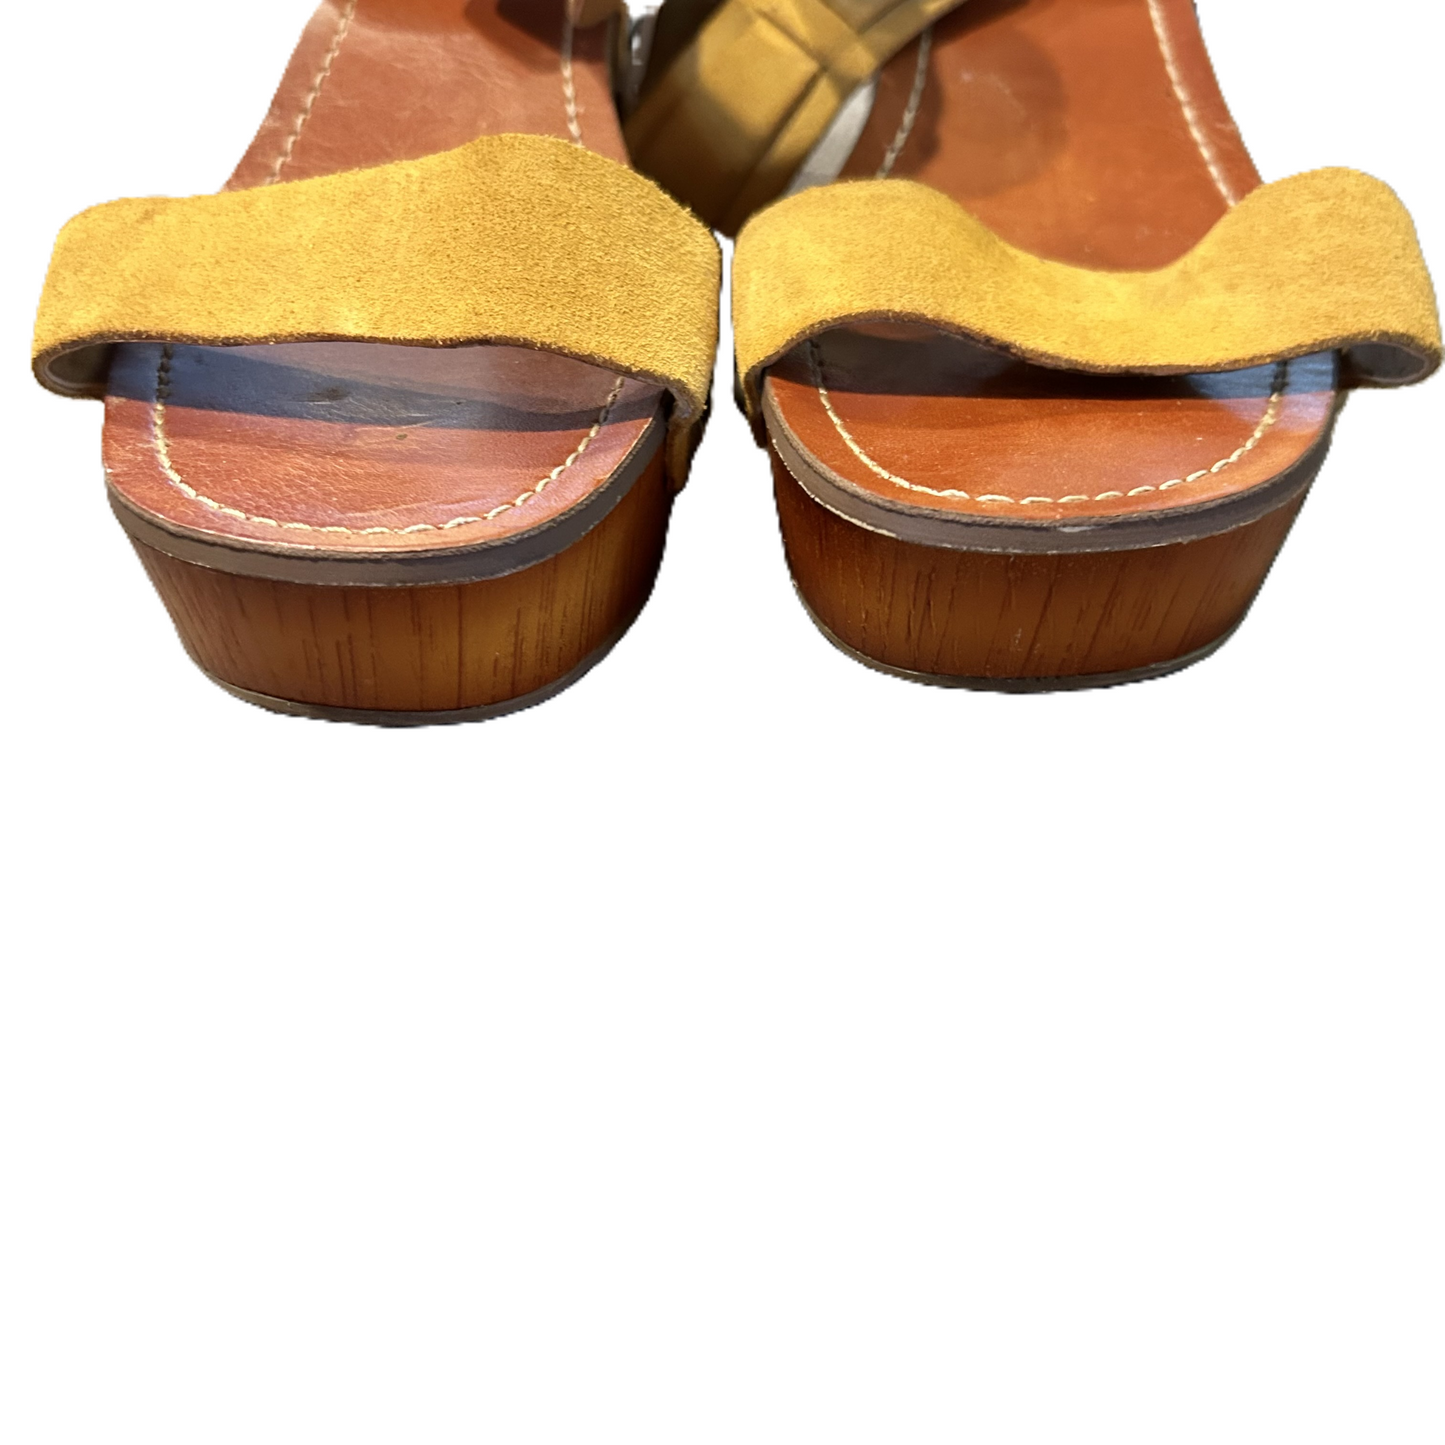 Yellow Sandals Heels Block By Lucky Brand, Size: 8.5